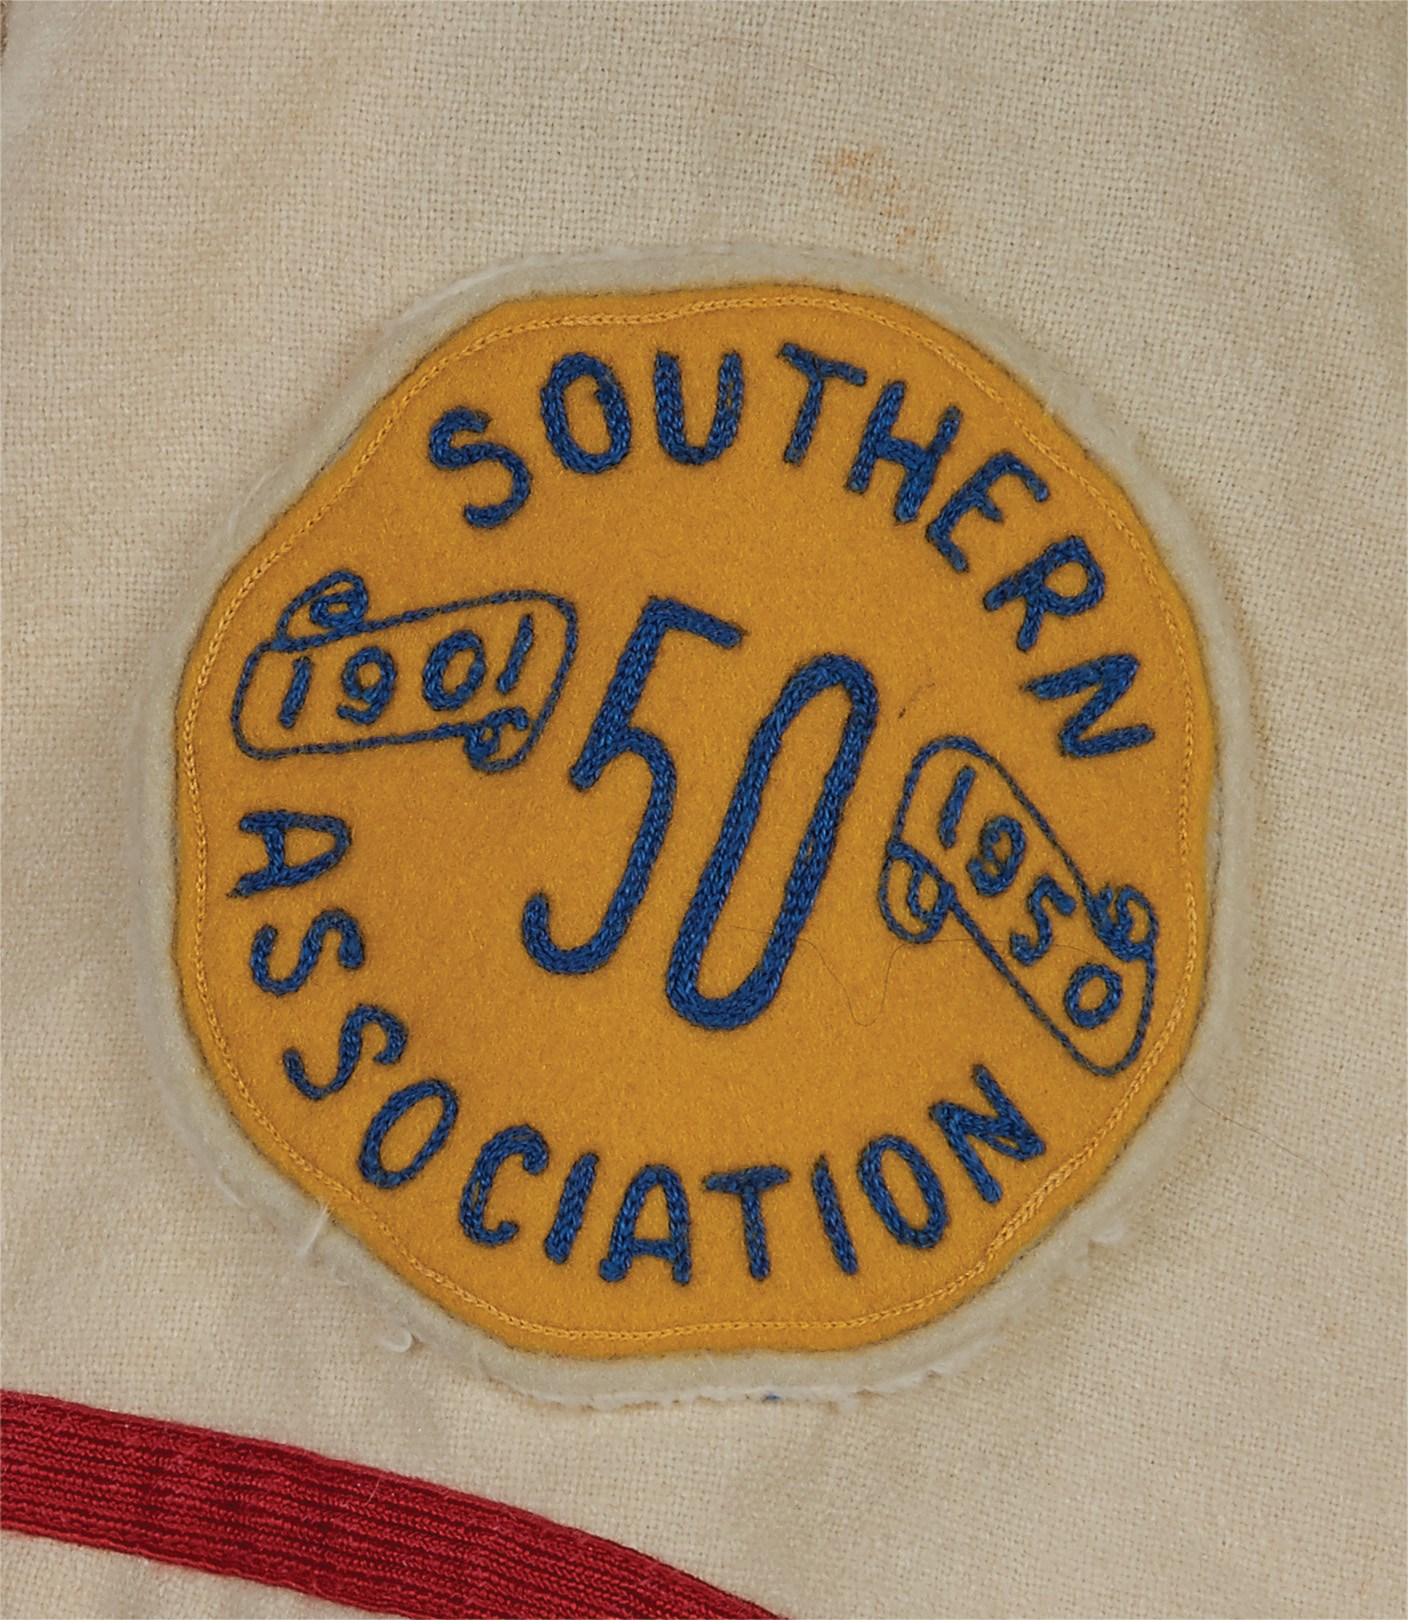 Bobo Newsom 1950 Chattanooga Lookouts Uniform w/Golden Anniversary Southern Association Patch